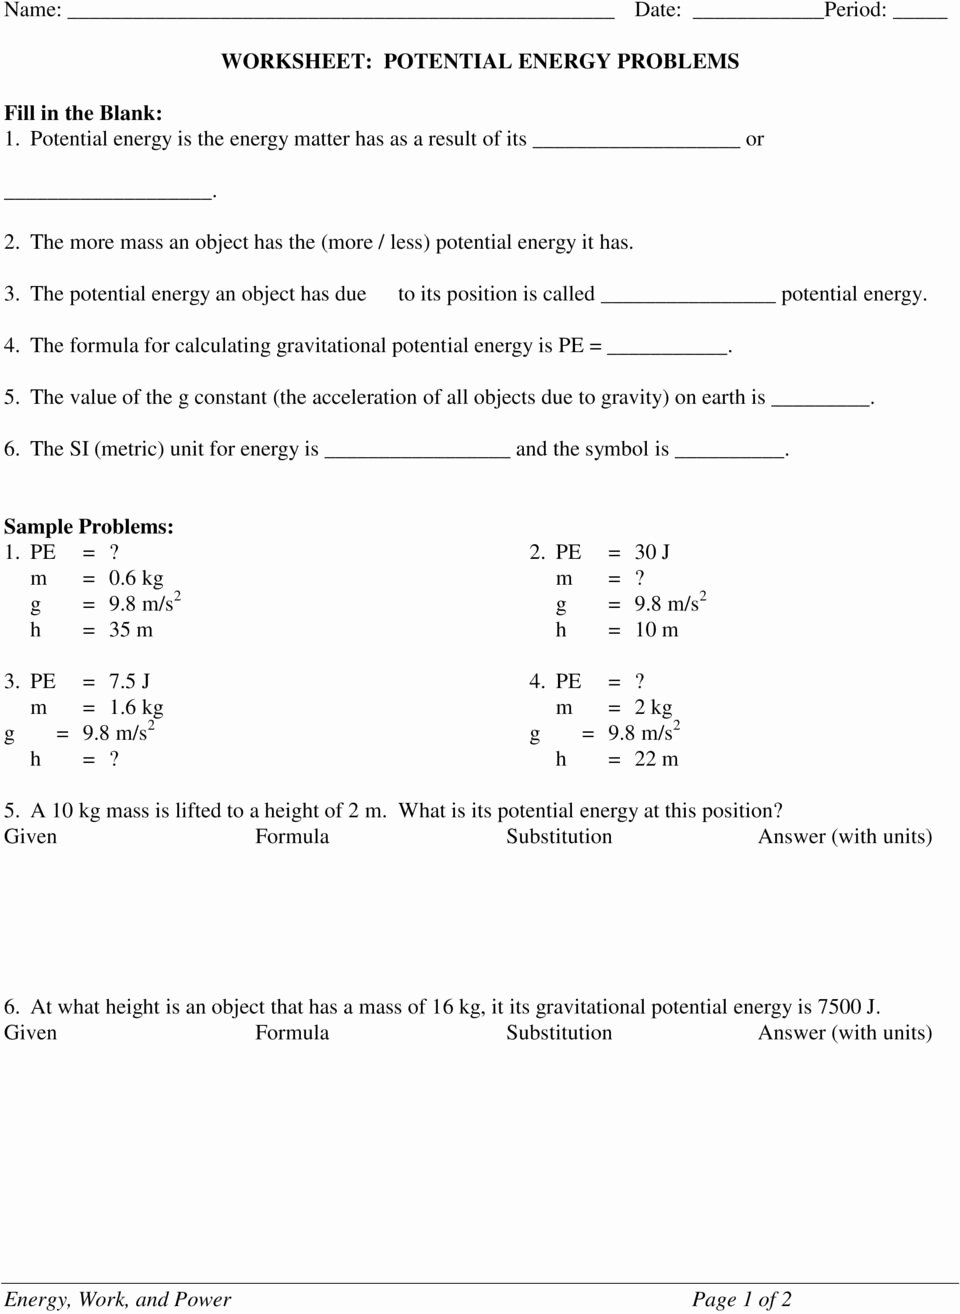 Introduction to Energy Worksheet Answers New Effective Report Writing Skills Training Course the